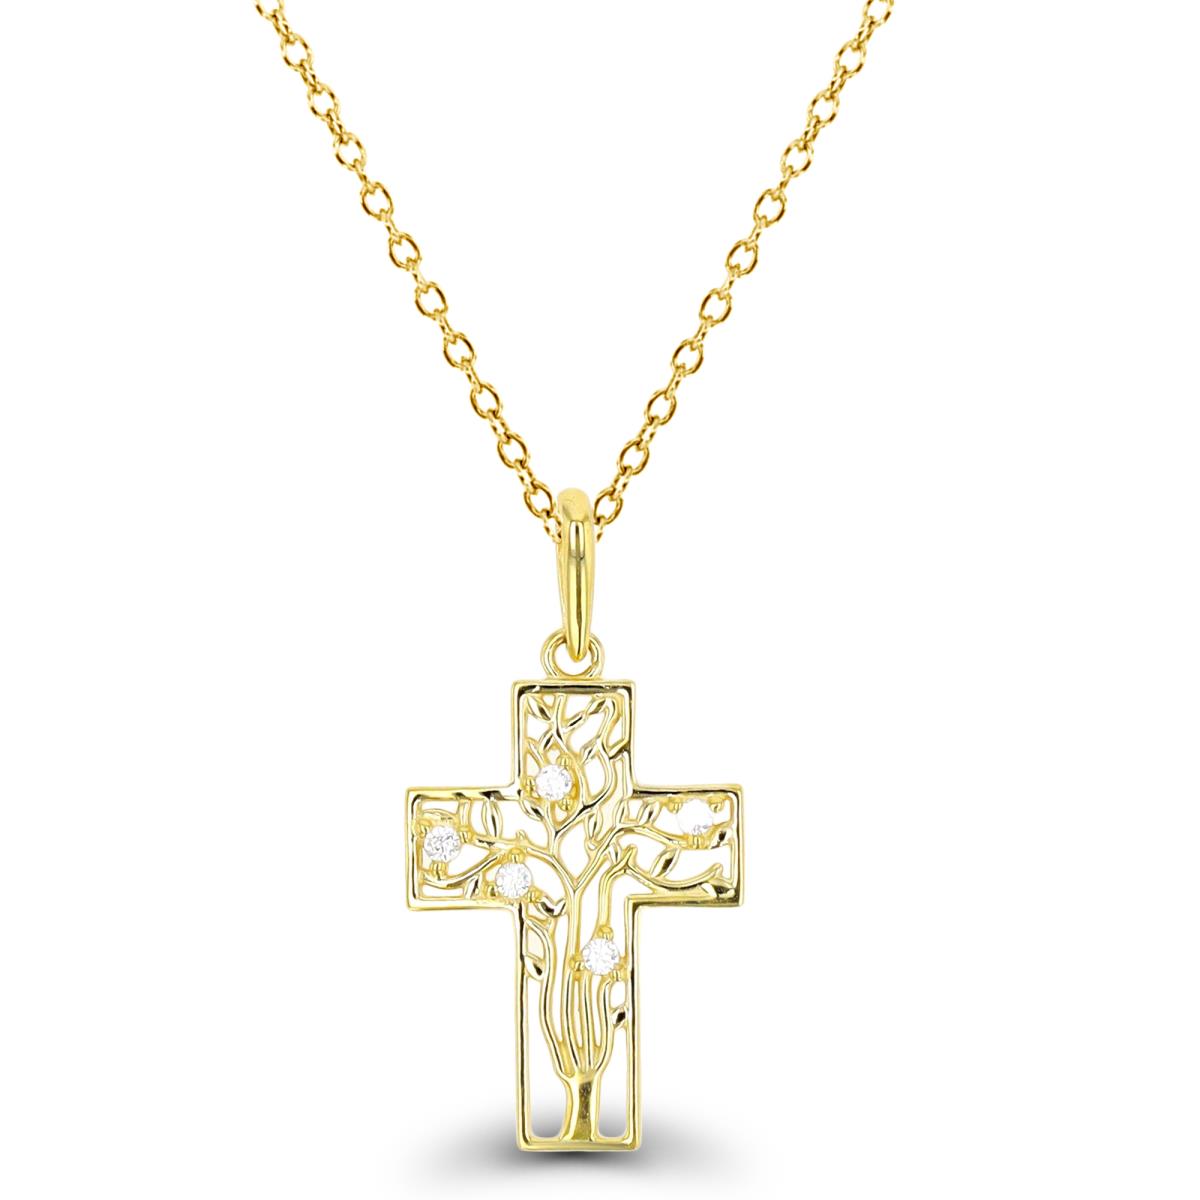 10K Yellow Gold Tree Cross 18" Necklace